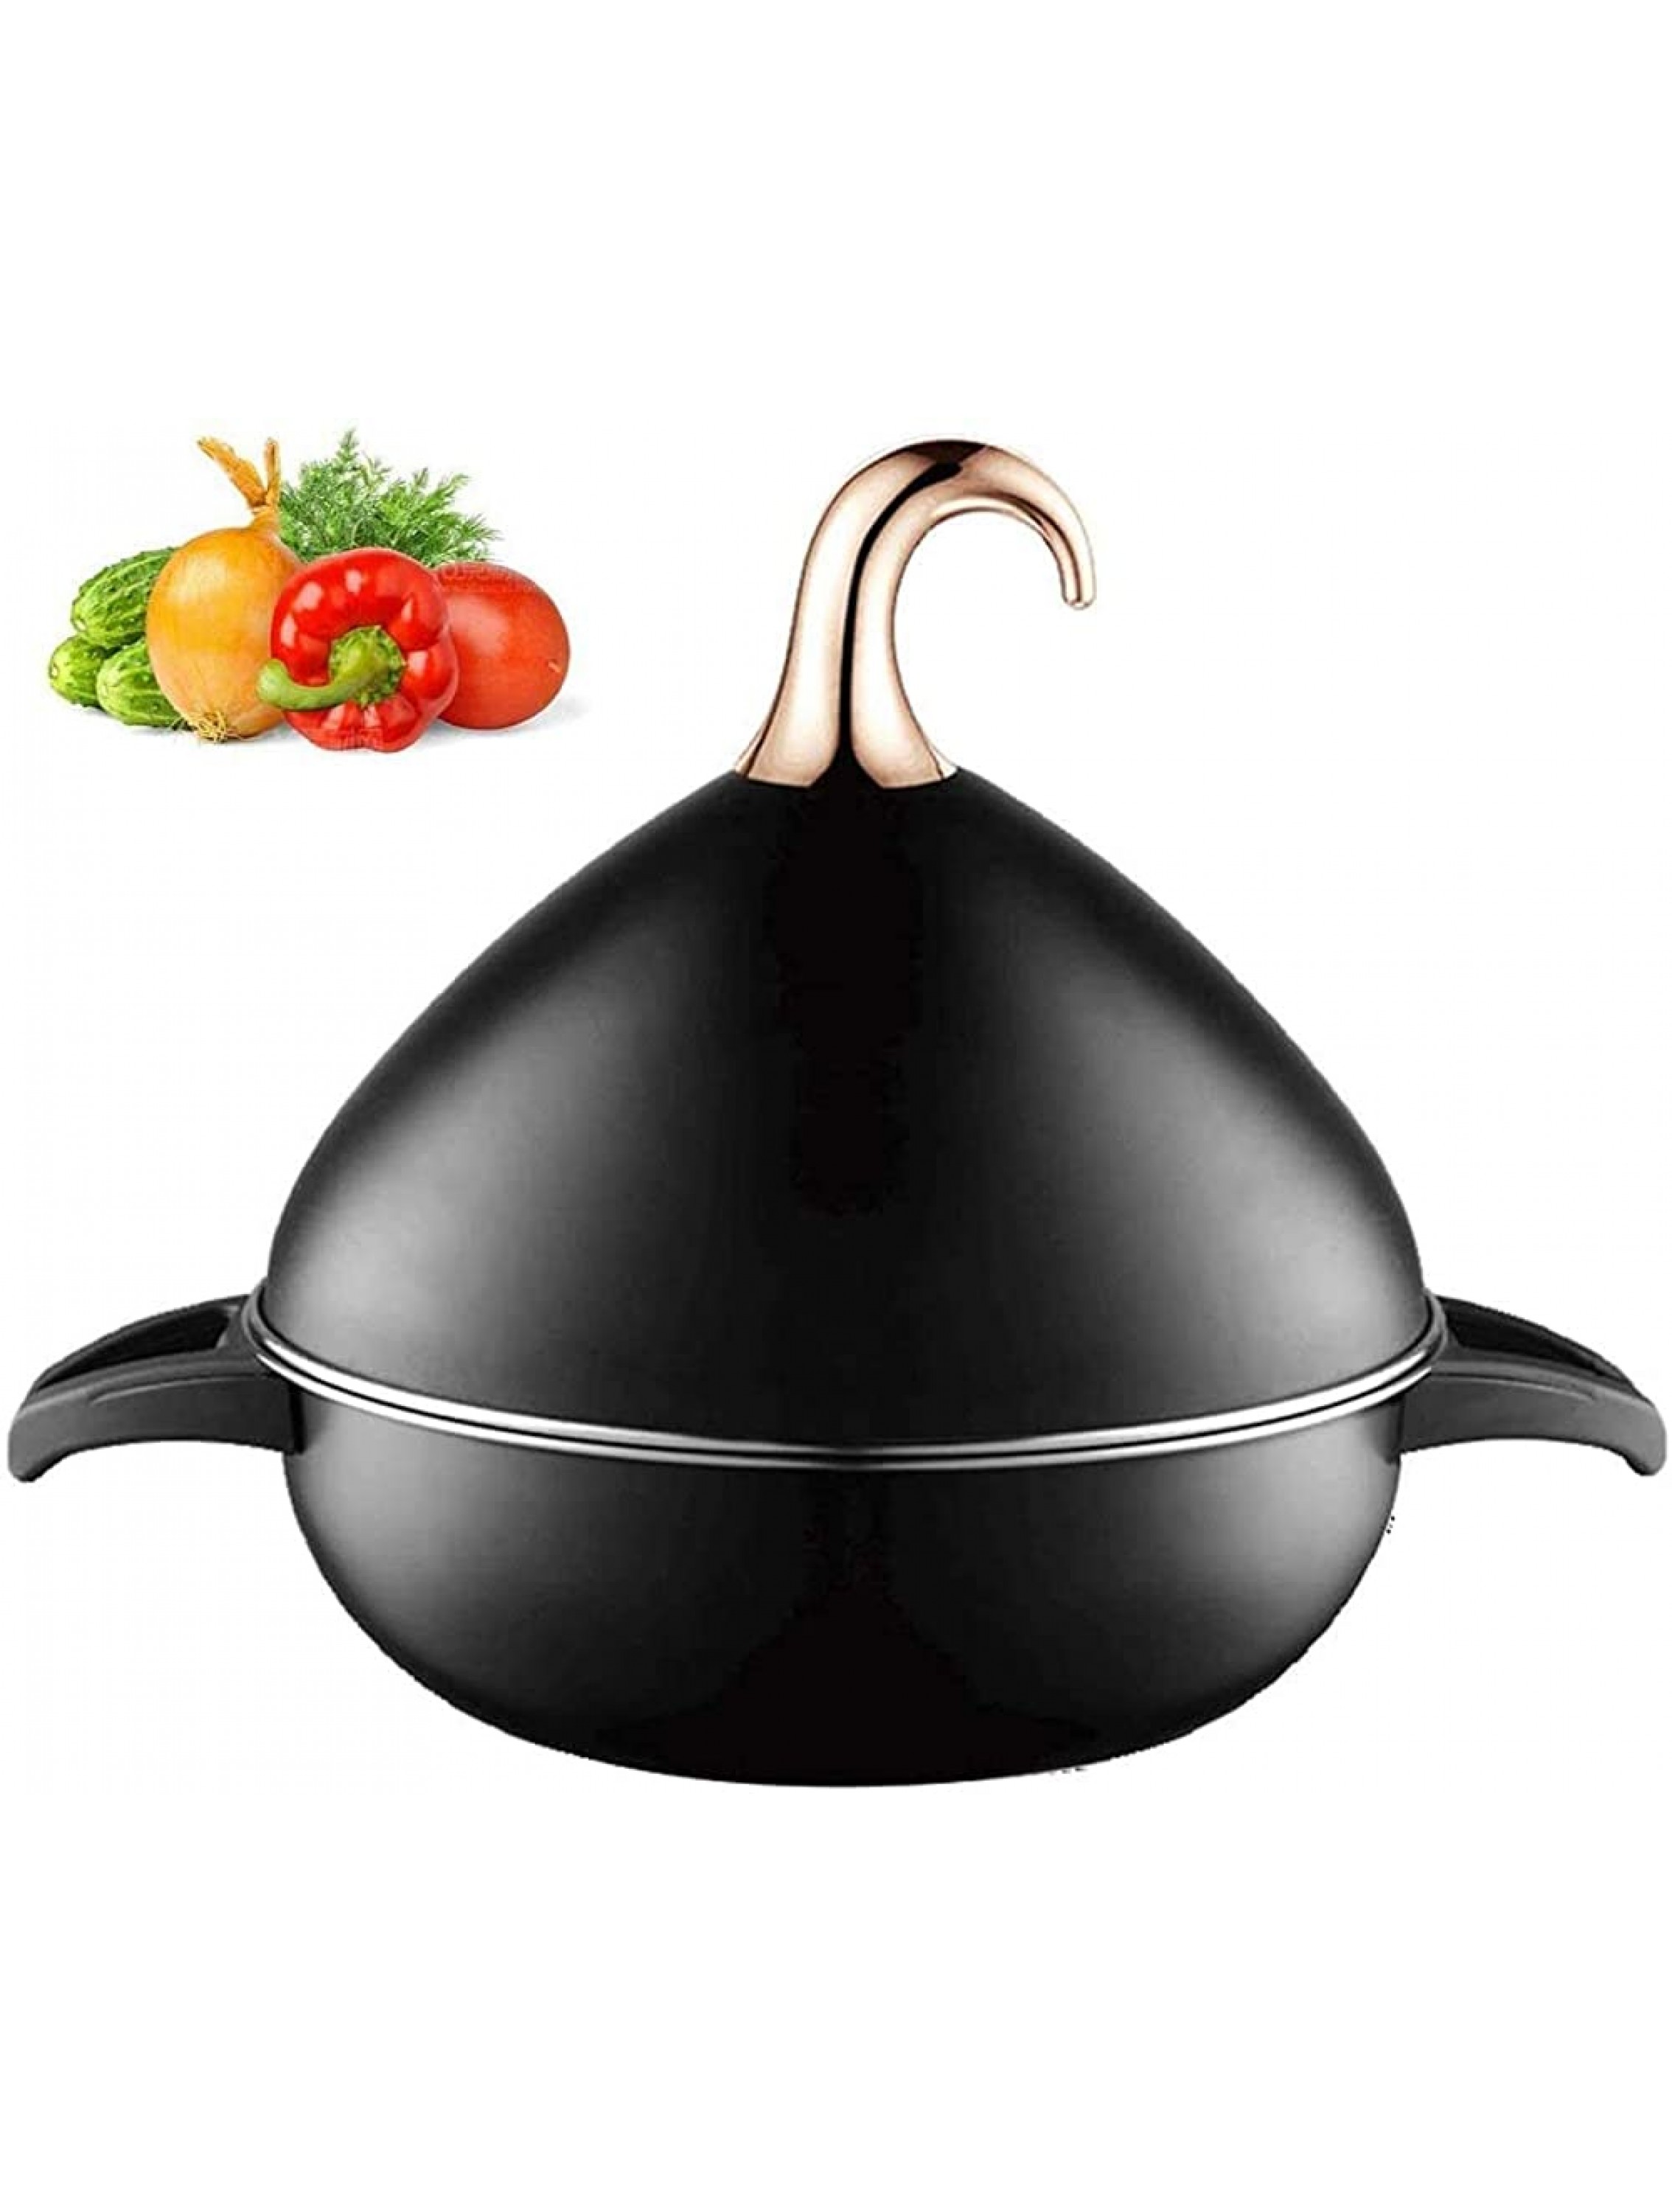 Chinese pottery -Cooker Pot 3.5L Cast iron pot|Tagine Pot with Enameled Cast Stainless Steel Base|easy to clean|Without Lead Cooking Healthy Food - BT1P9H1UB